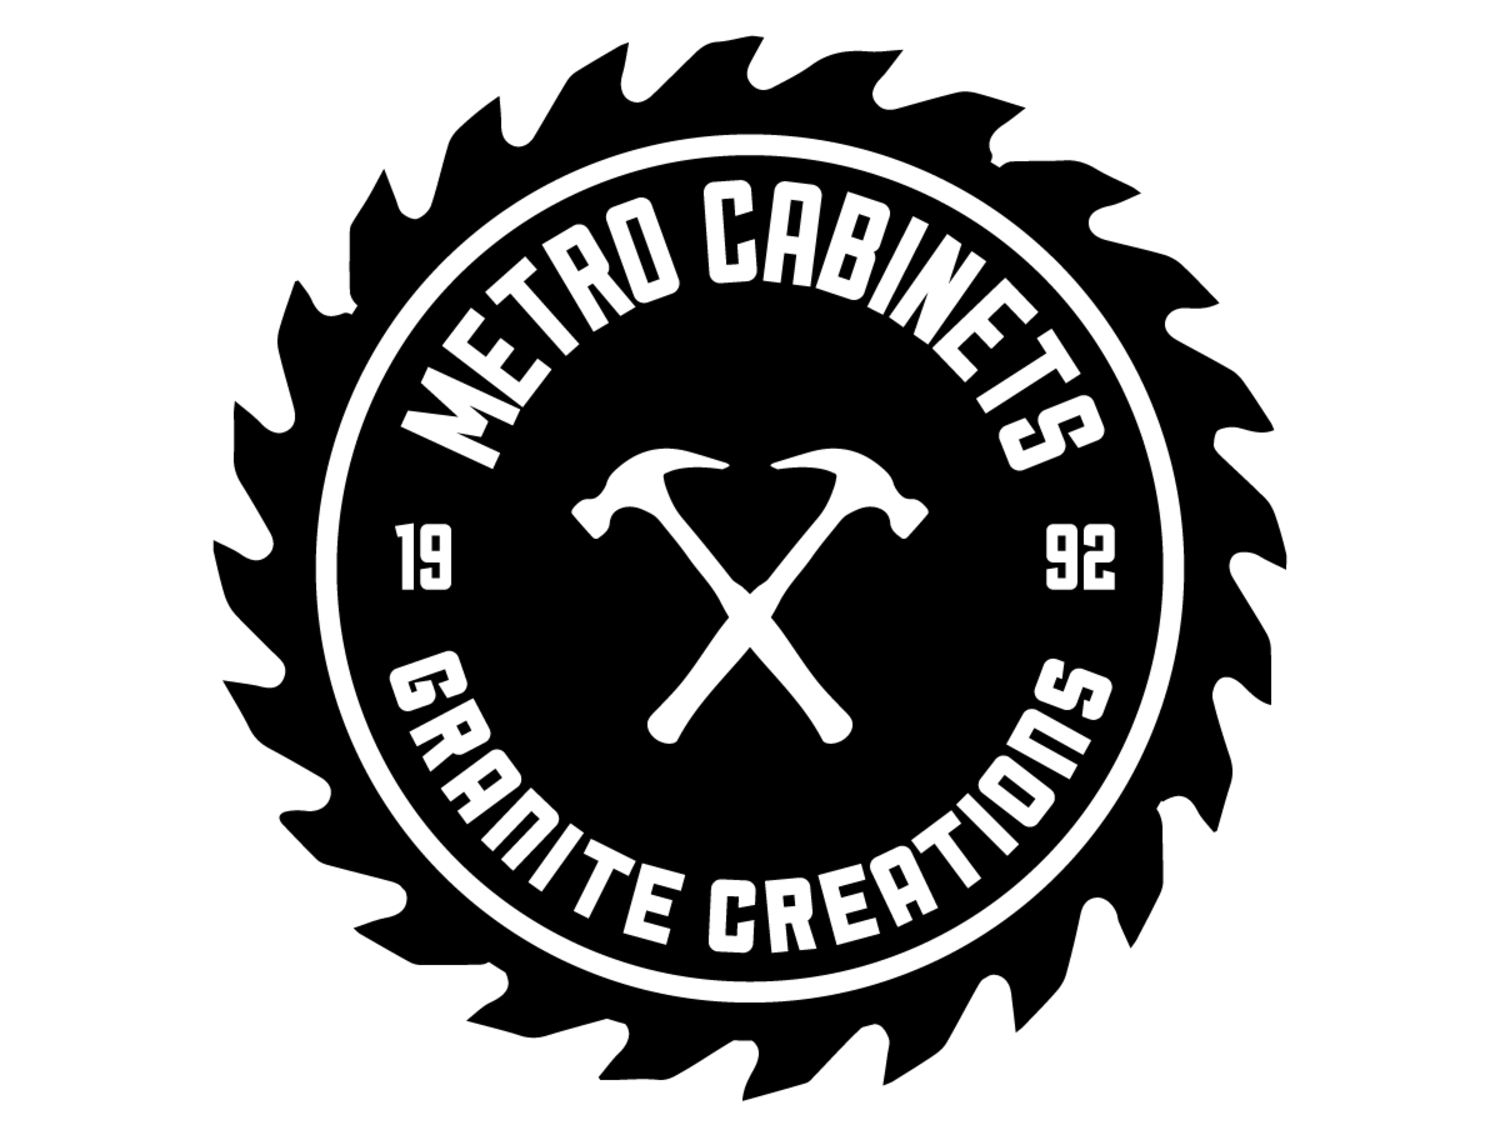 Metro Cabinets and Granite Creations